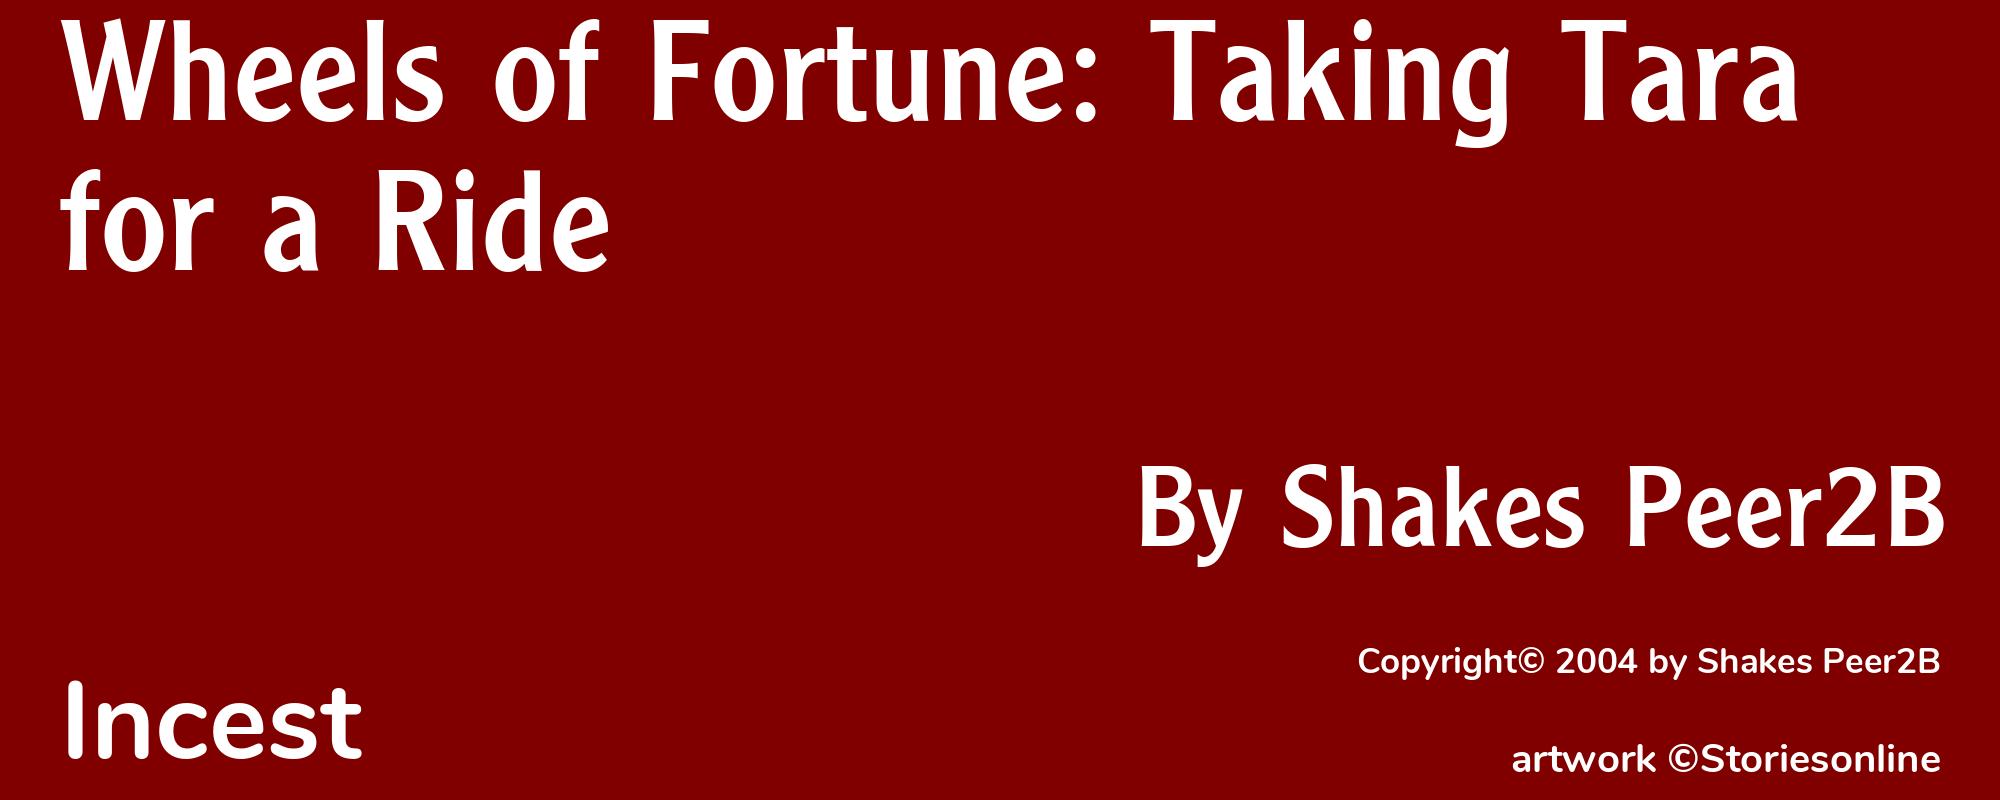 Wheels of Fortune: Taking Tara for a Ride - Cover